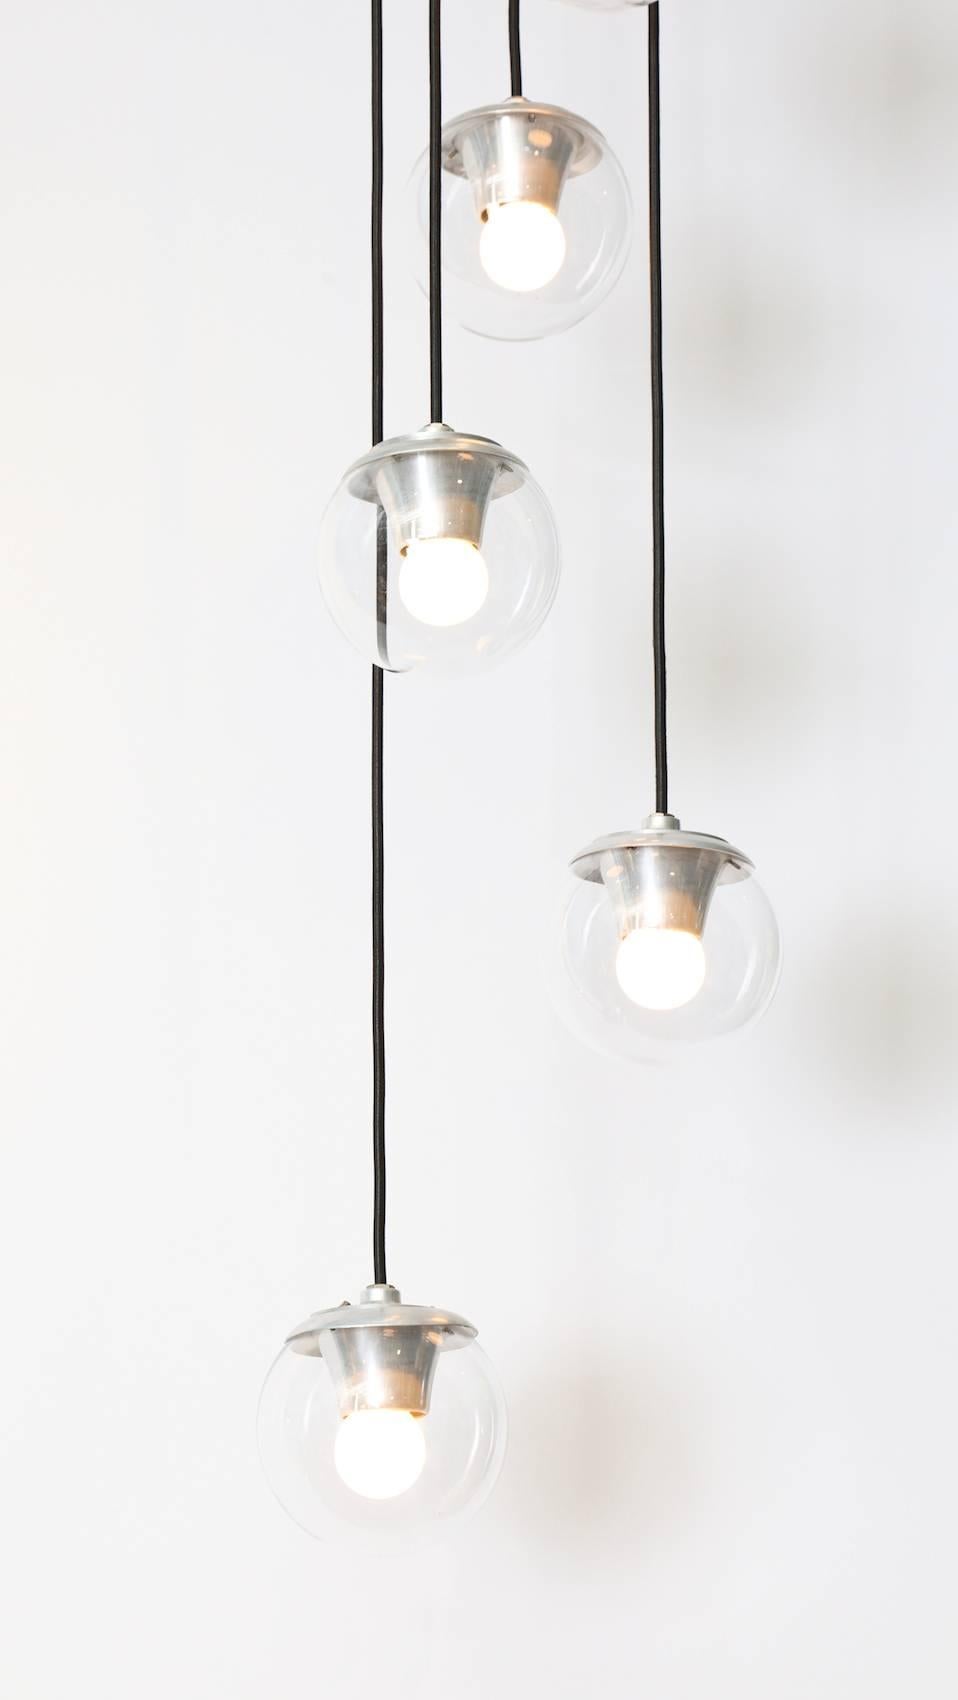 Gino Sarfatti for Arteluce five-light hanging fixture #2095. Cascading light with five glass globes hanging at different heights. Each orb contains 1 Edison sized socket. A beautiful and rare Sarfatti design.